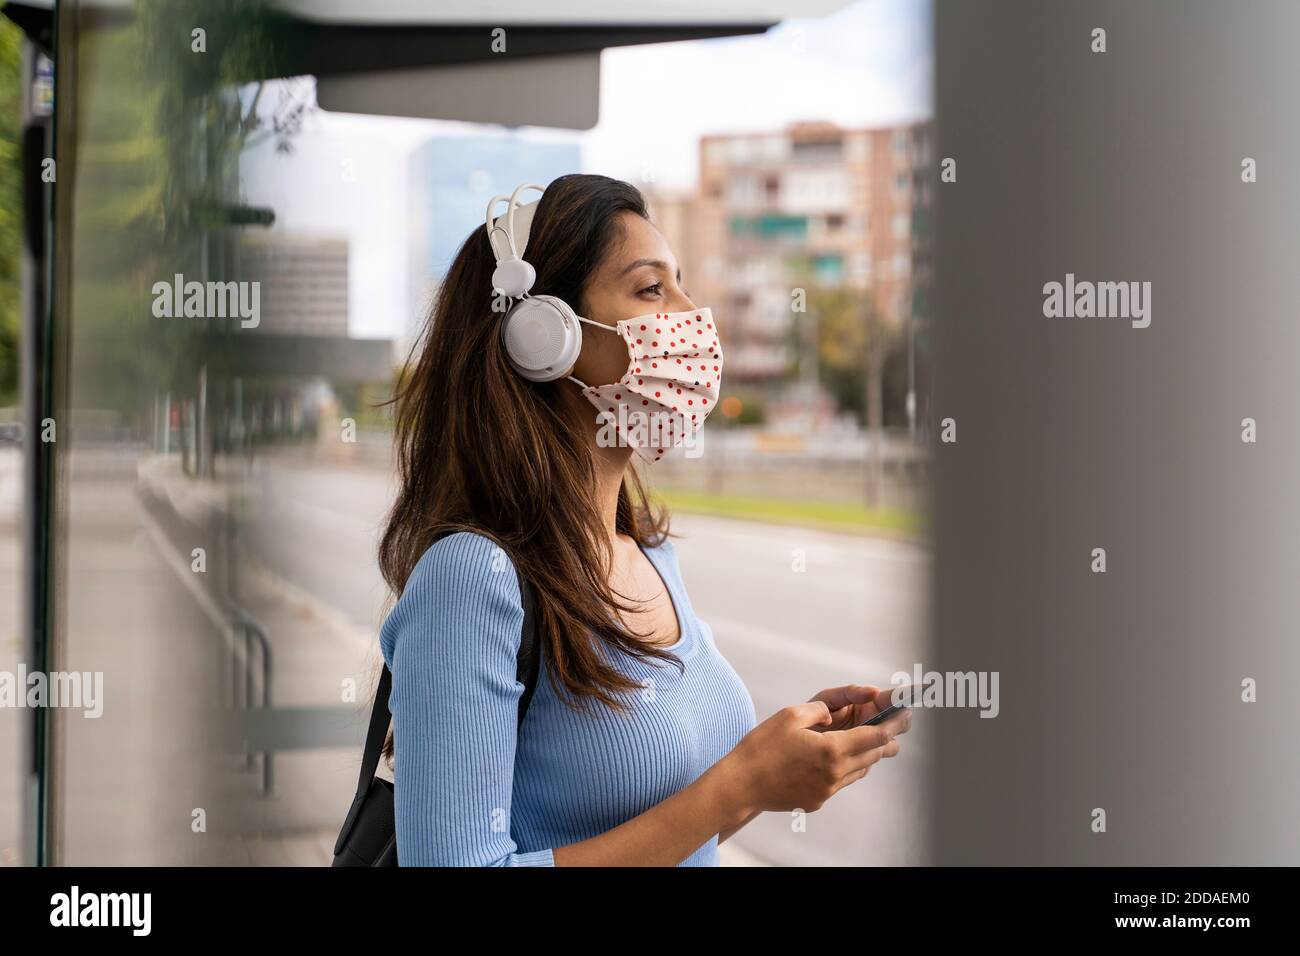 Contemplating woman in face mask wearing headphones with smart phone at bus stand during COVID-19 Stock Photo